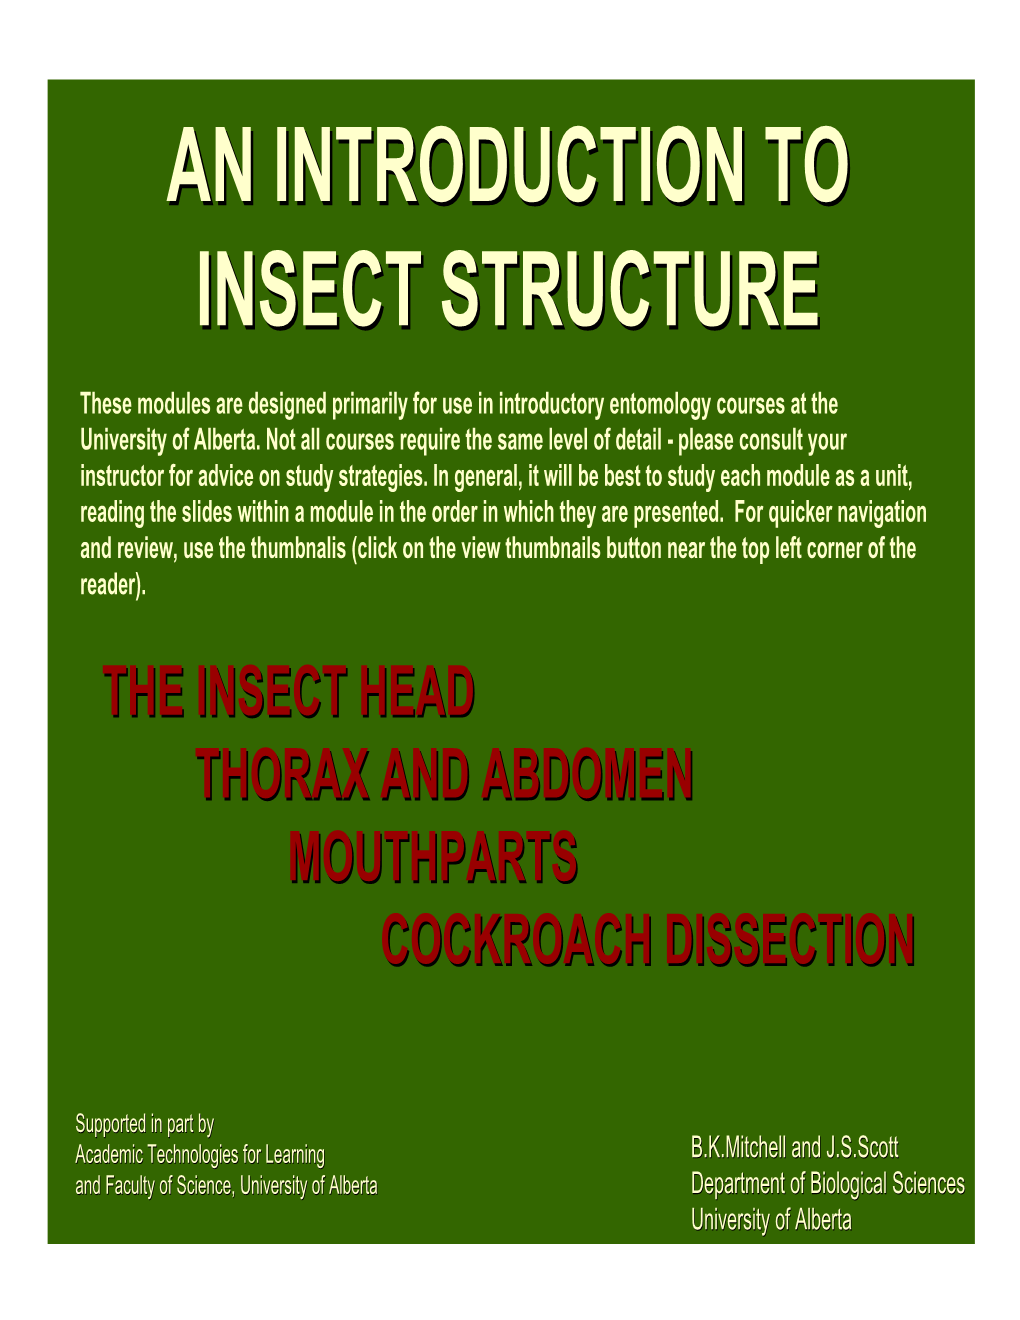 An Introduction to Insect Structure